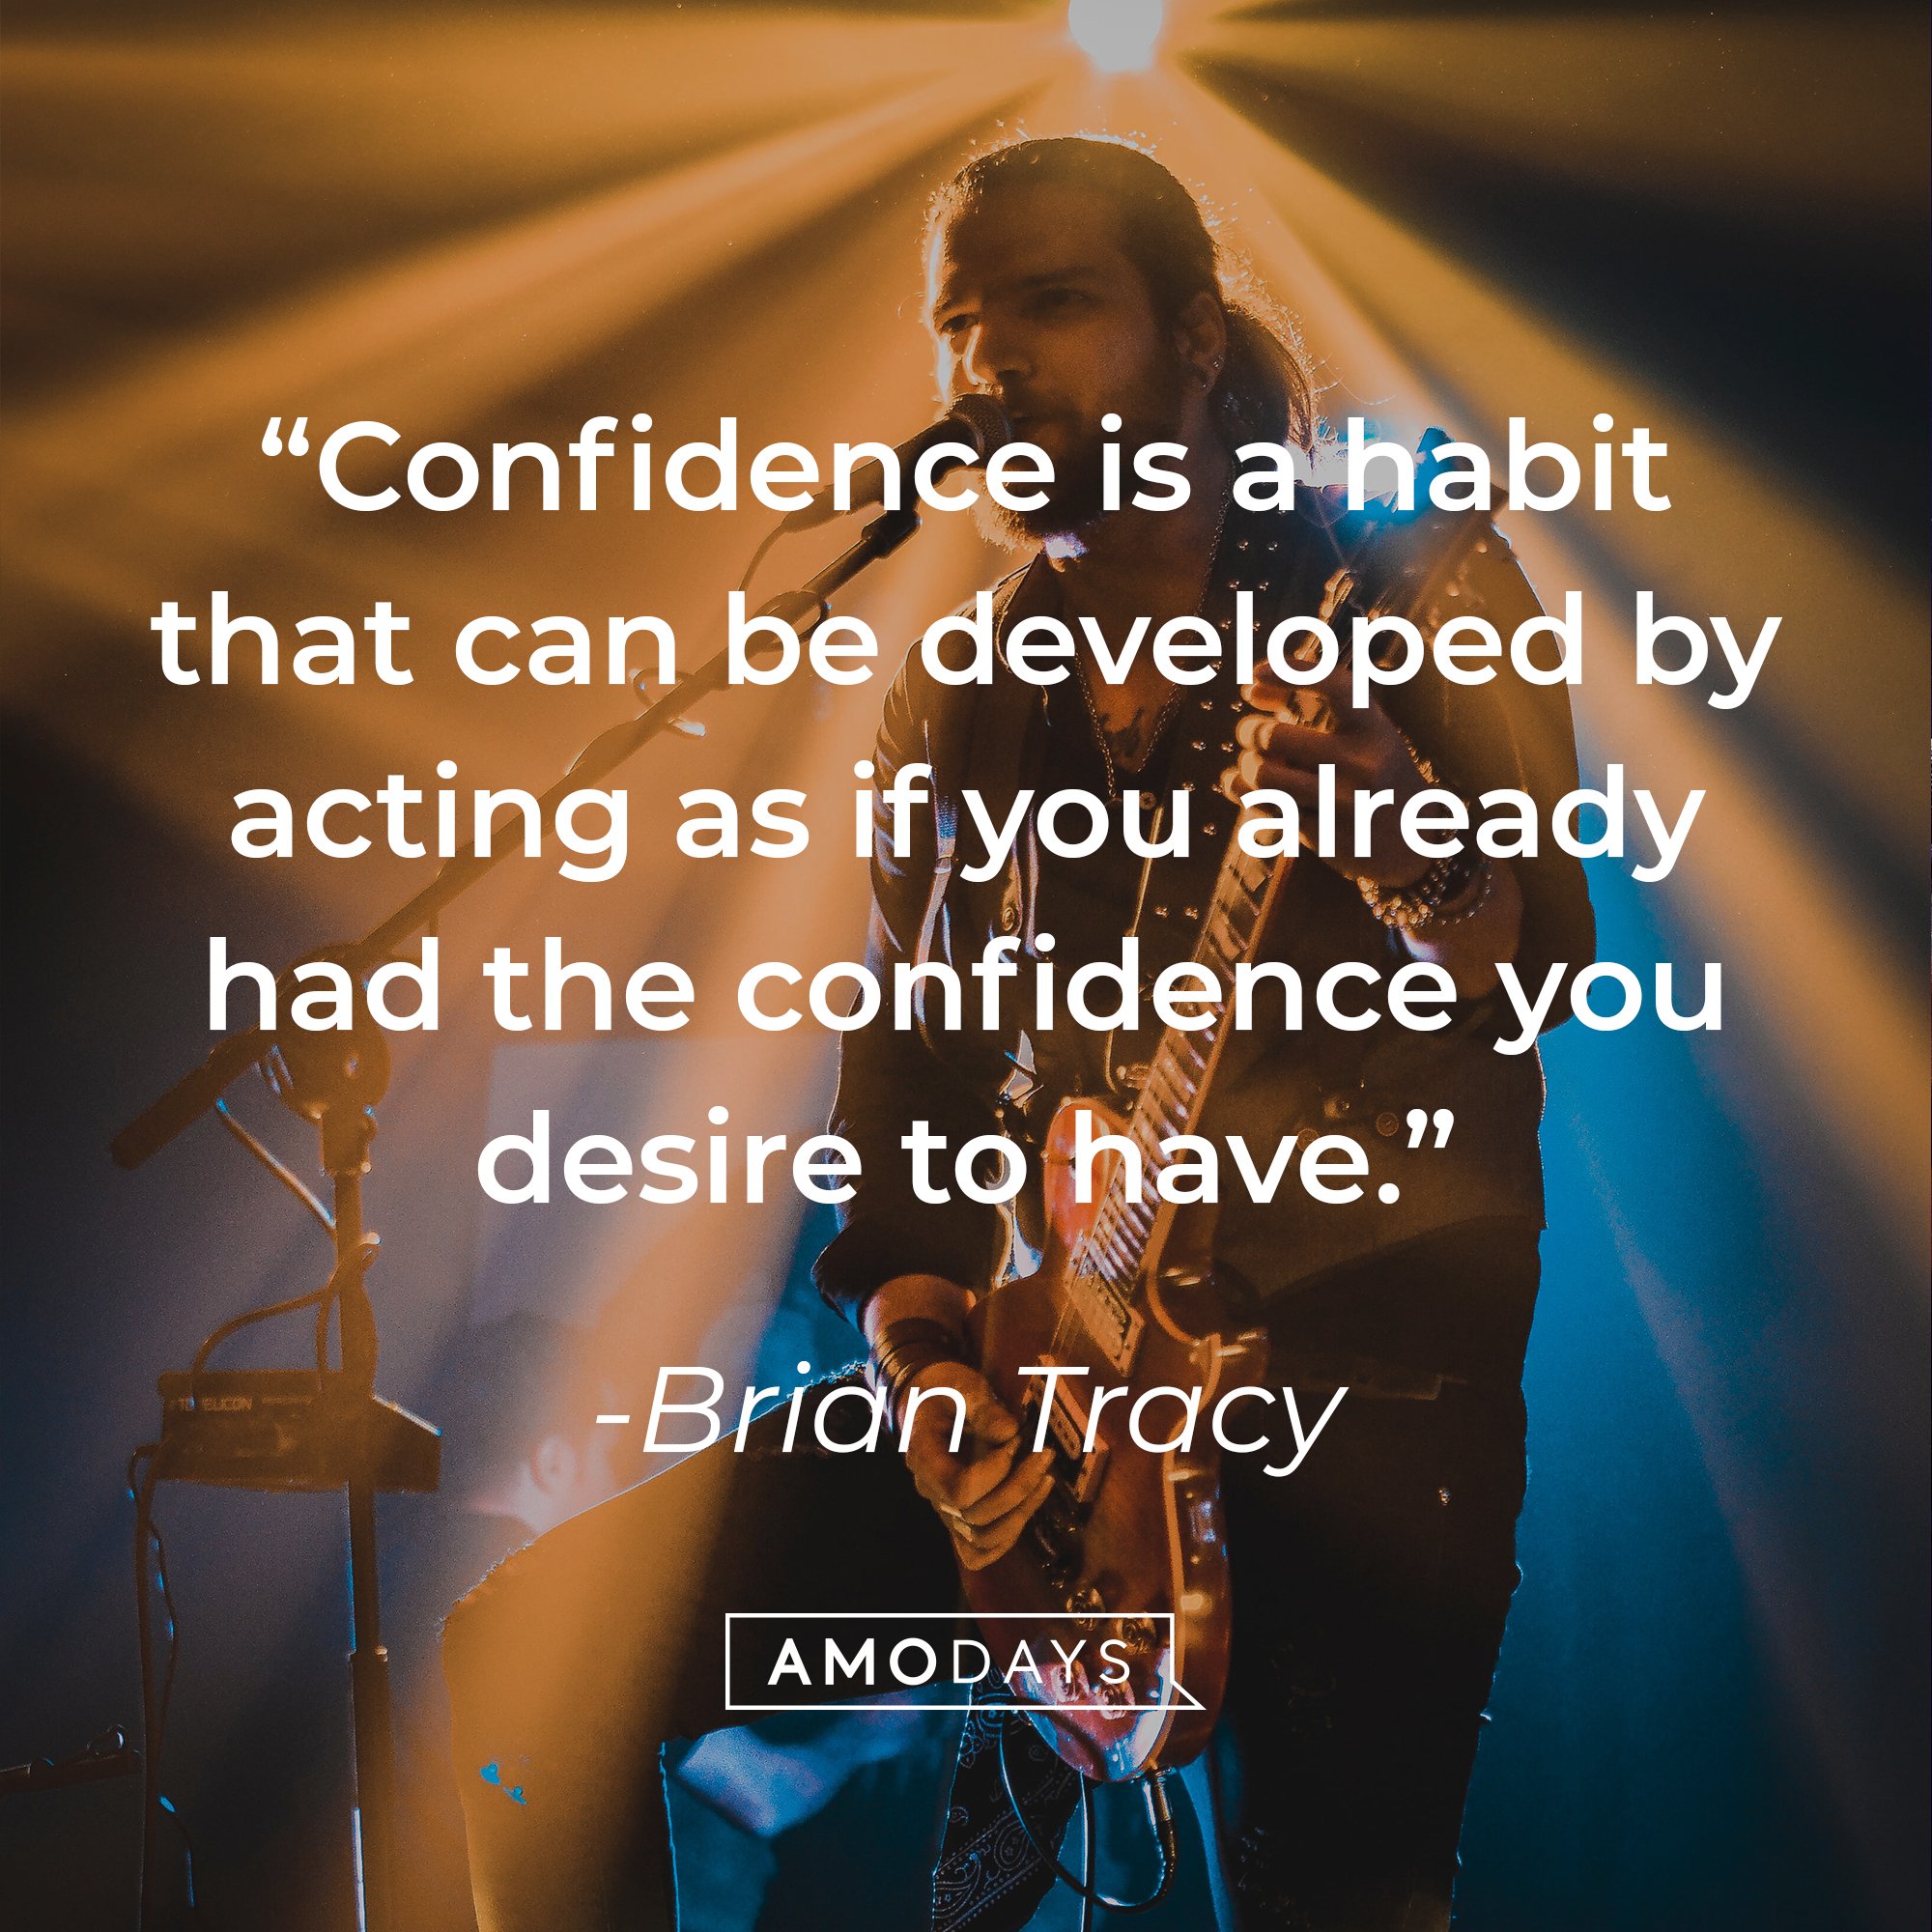  Brian Tracy's quote: “Confidence is a habit that can be developed by acting as if you already had the confidence you desire to have.” | Images: Amoays